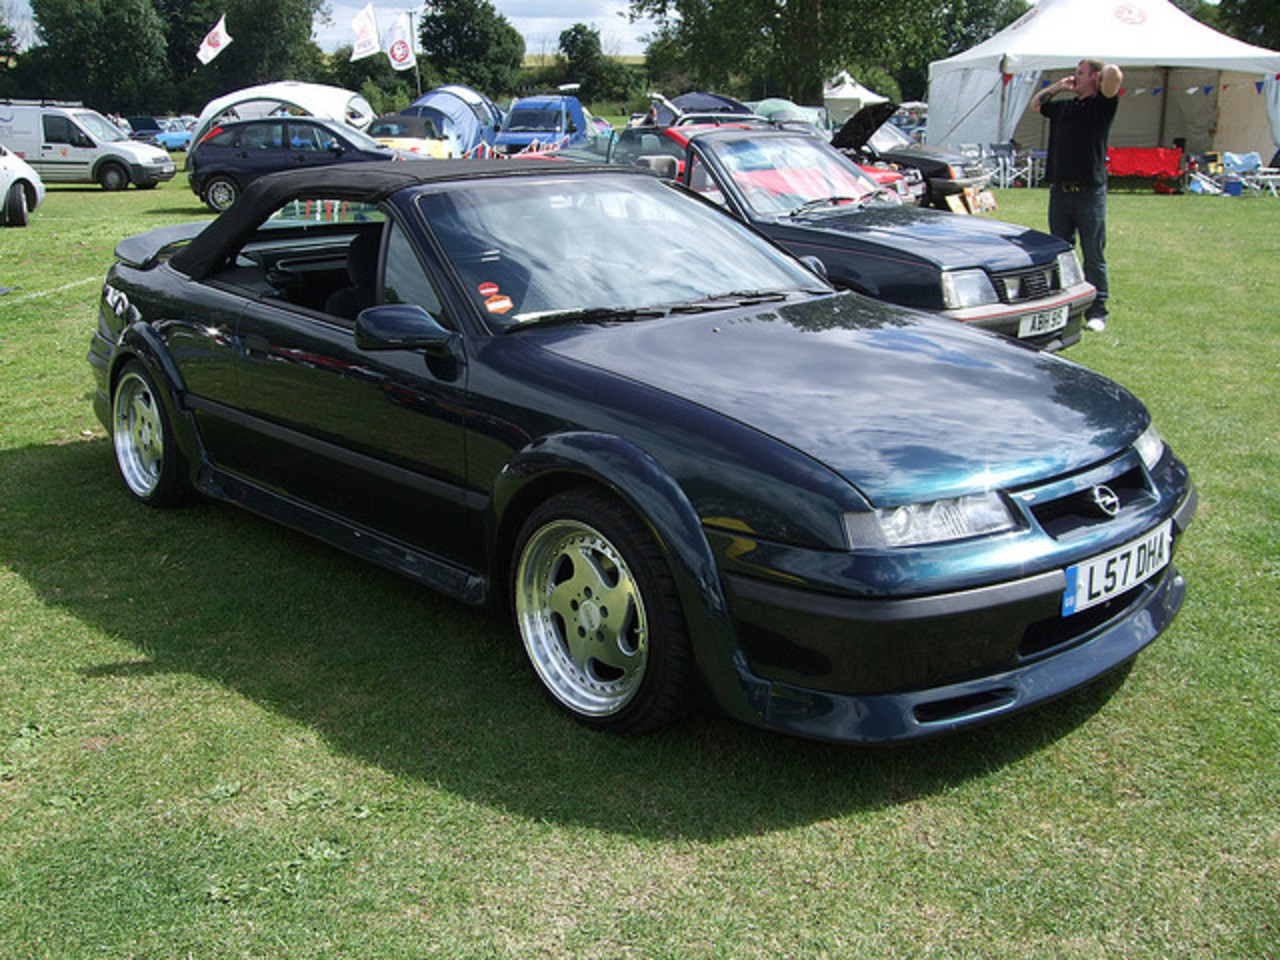 Flickr: The The Vauxhall/Opel/Holden/Chevrolet Calibra Pool